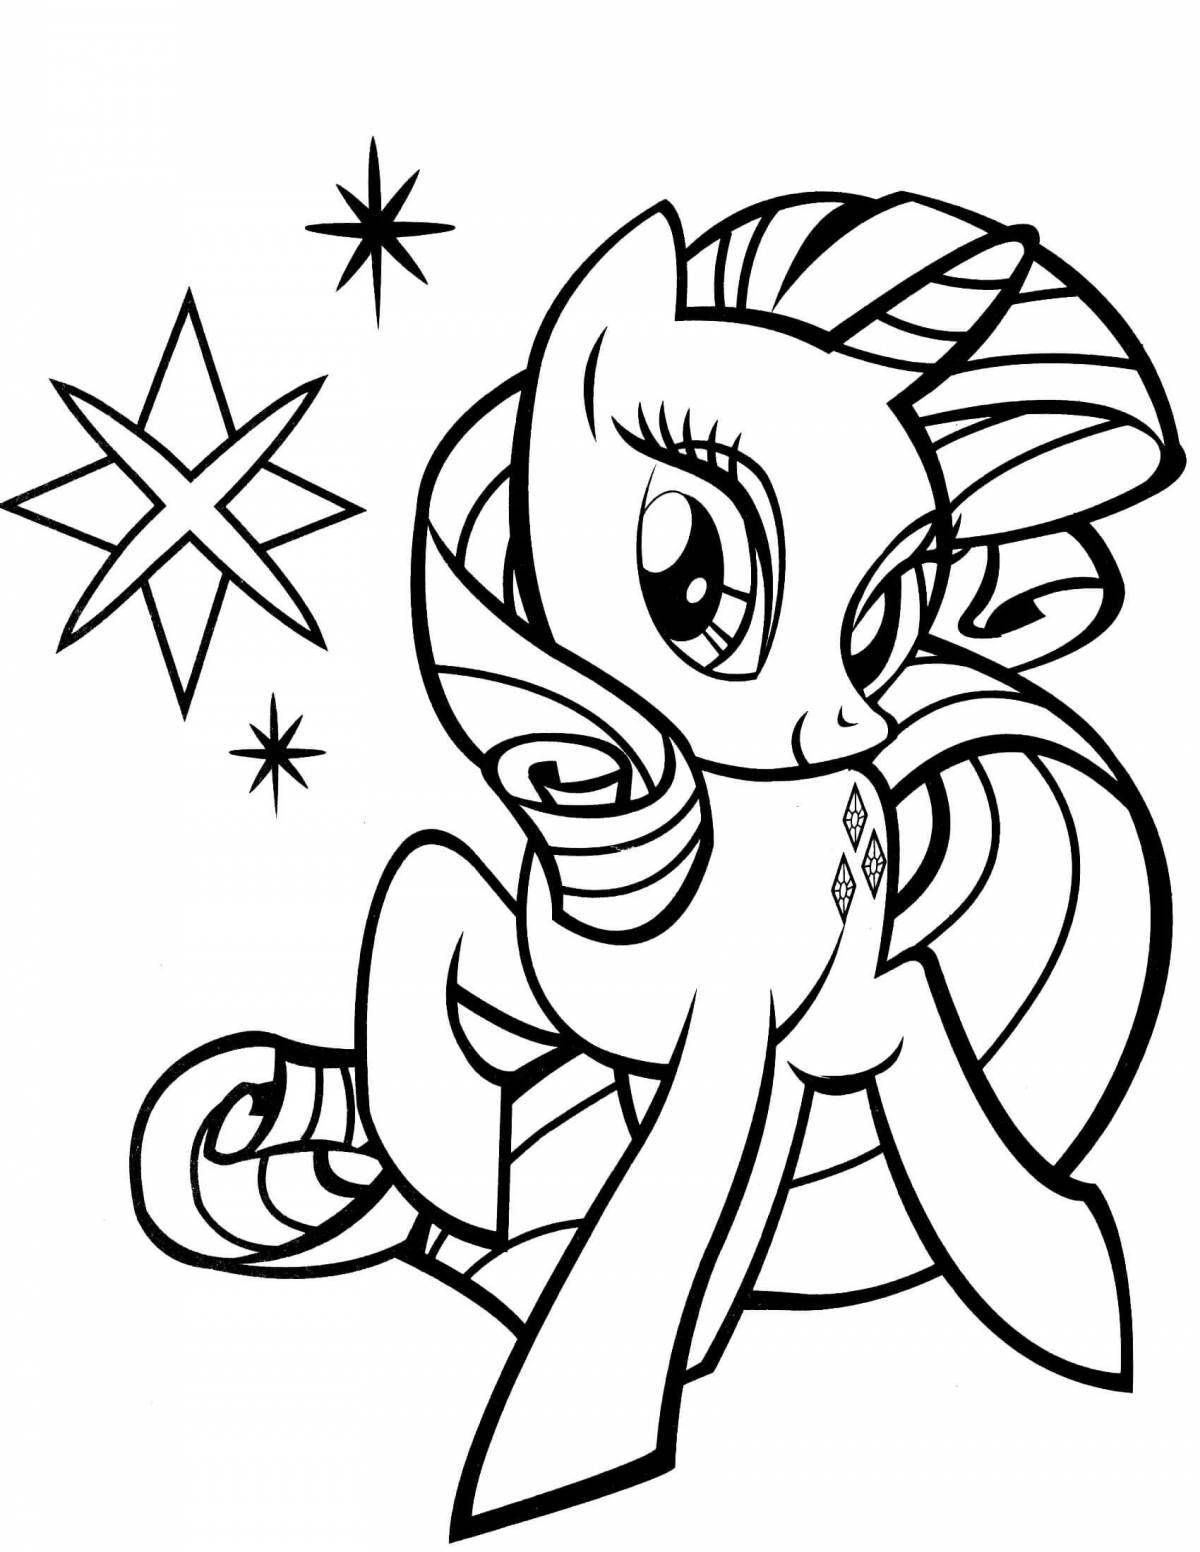 My little pony shining coloring book